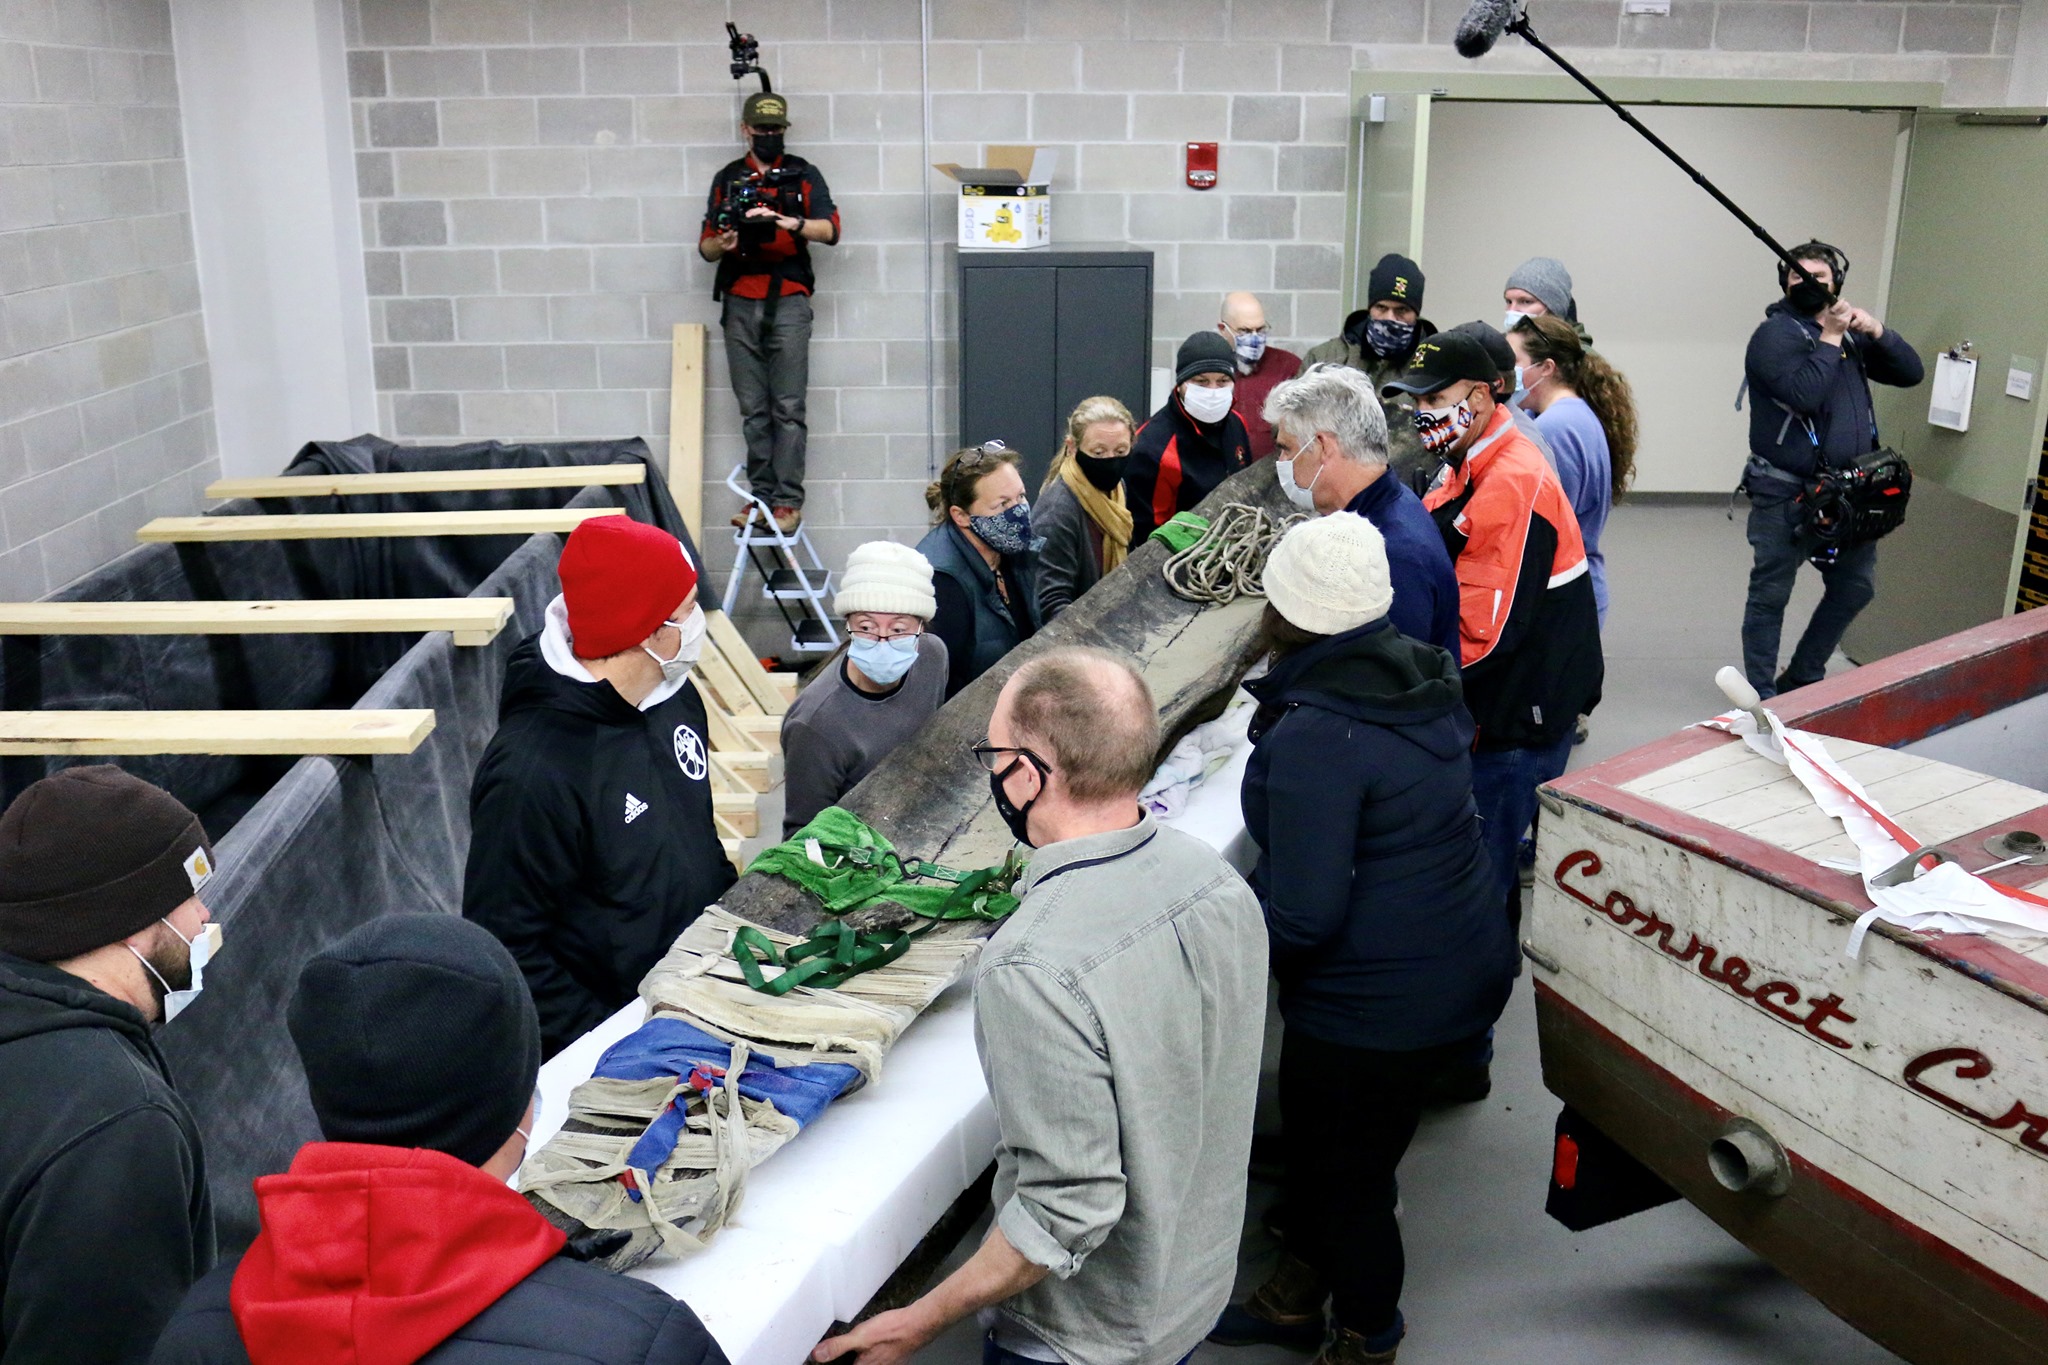 The canoe was recovered in Lake Mendota and was later transferred to the State Archive Preservation Facility in Madison, WI. The canoe was placed into a custom-built container for preservation.